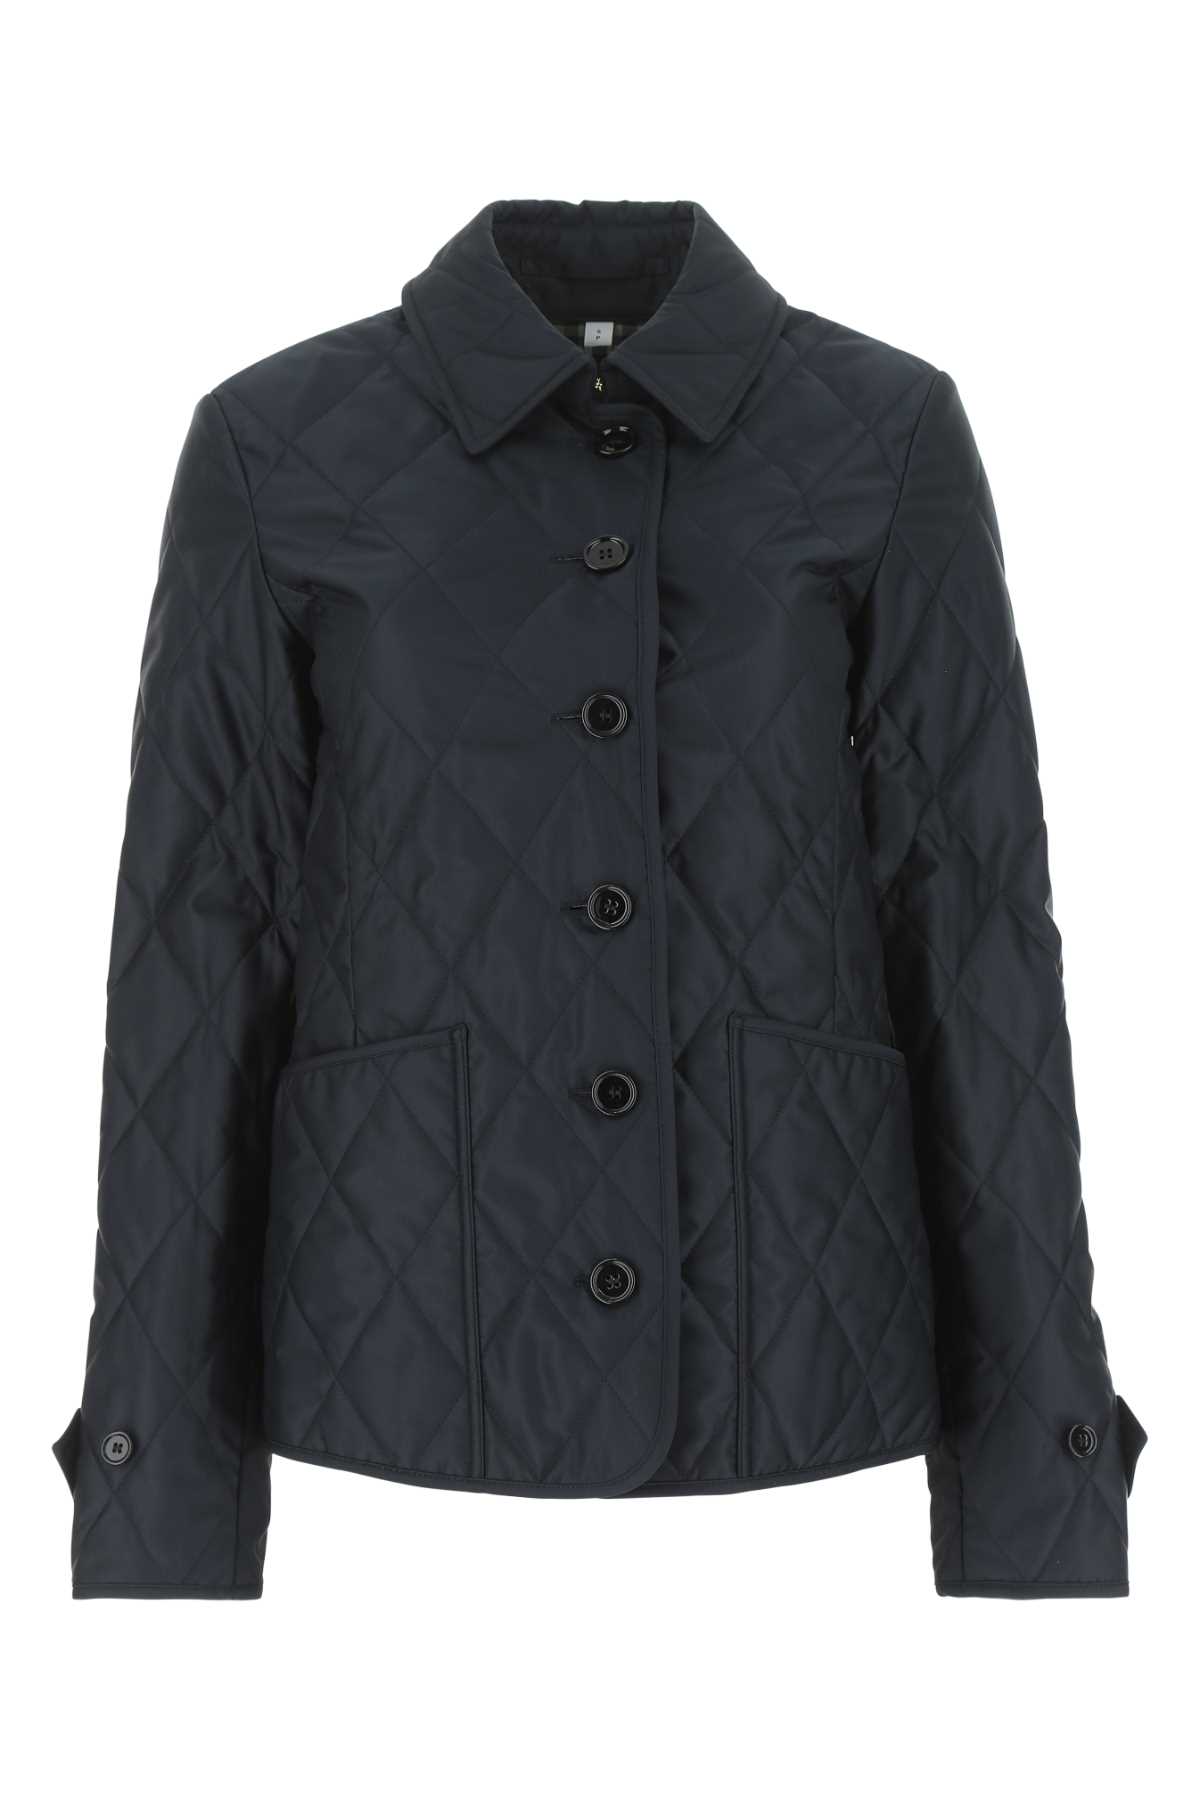 Shop Burberry Navy Blue Polyester Jacket In A1177